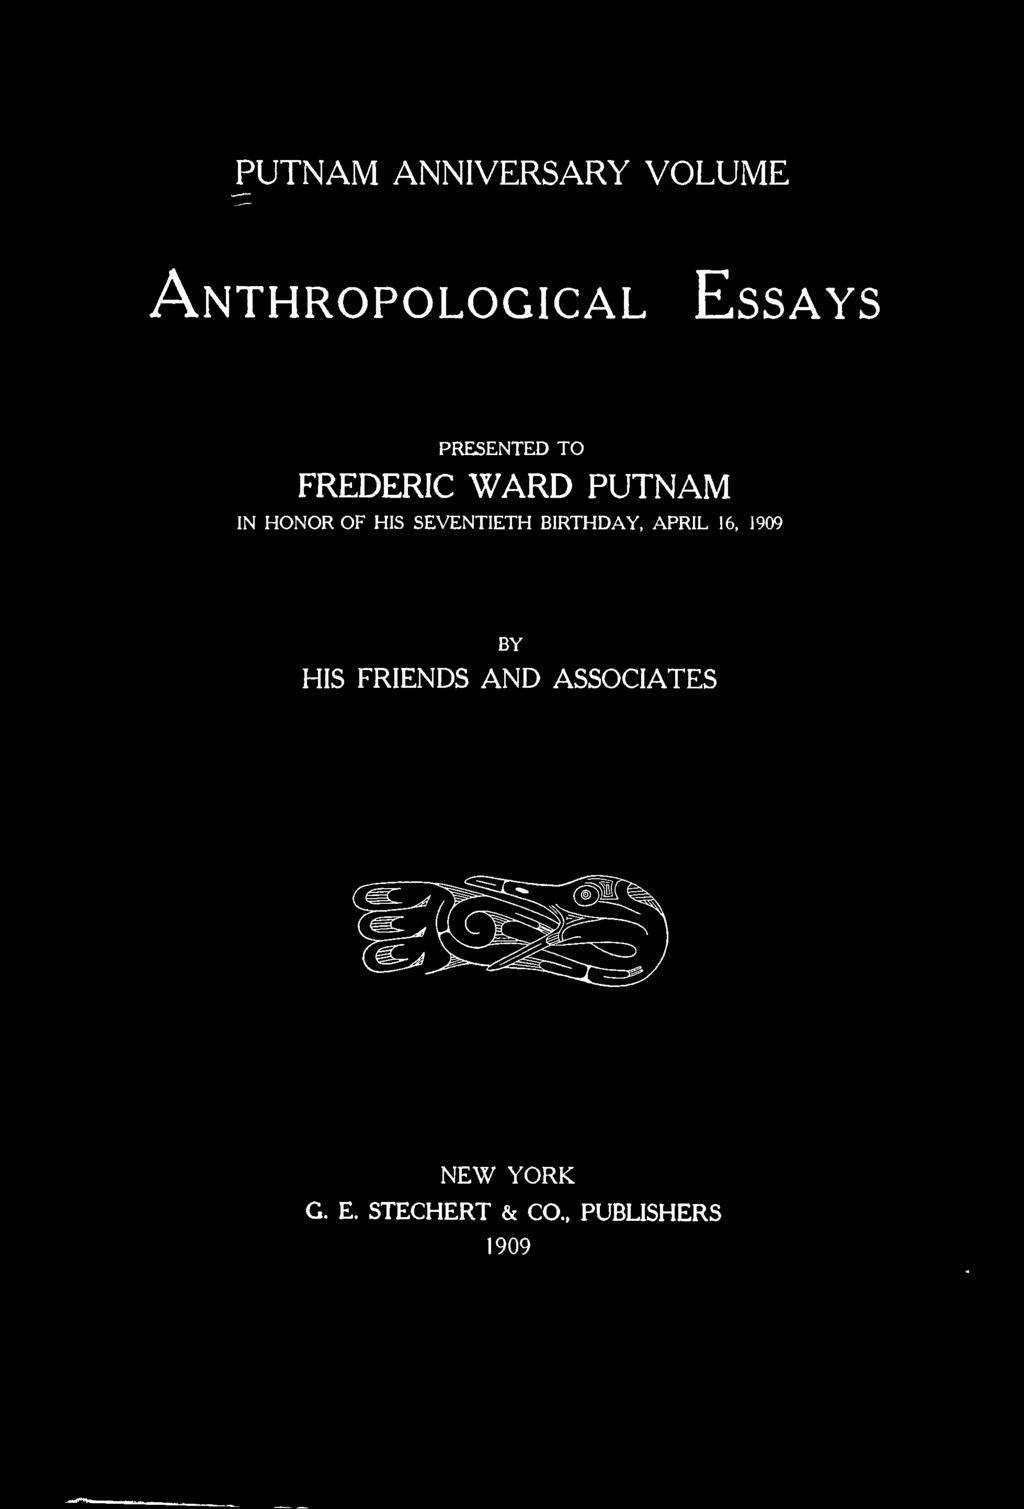 PUTNAM ANNIVERSARY VOLUME Anthropological Essays PRESENTED TO FREDERIC WARD PUTNAM IN HONOR OF HIS